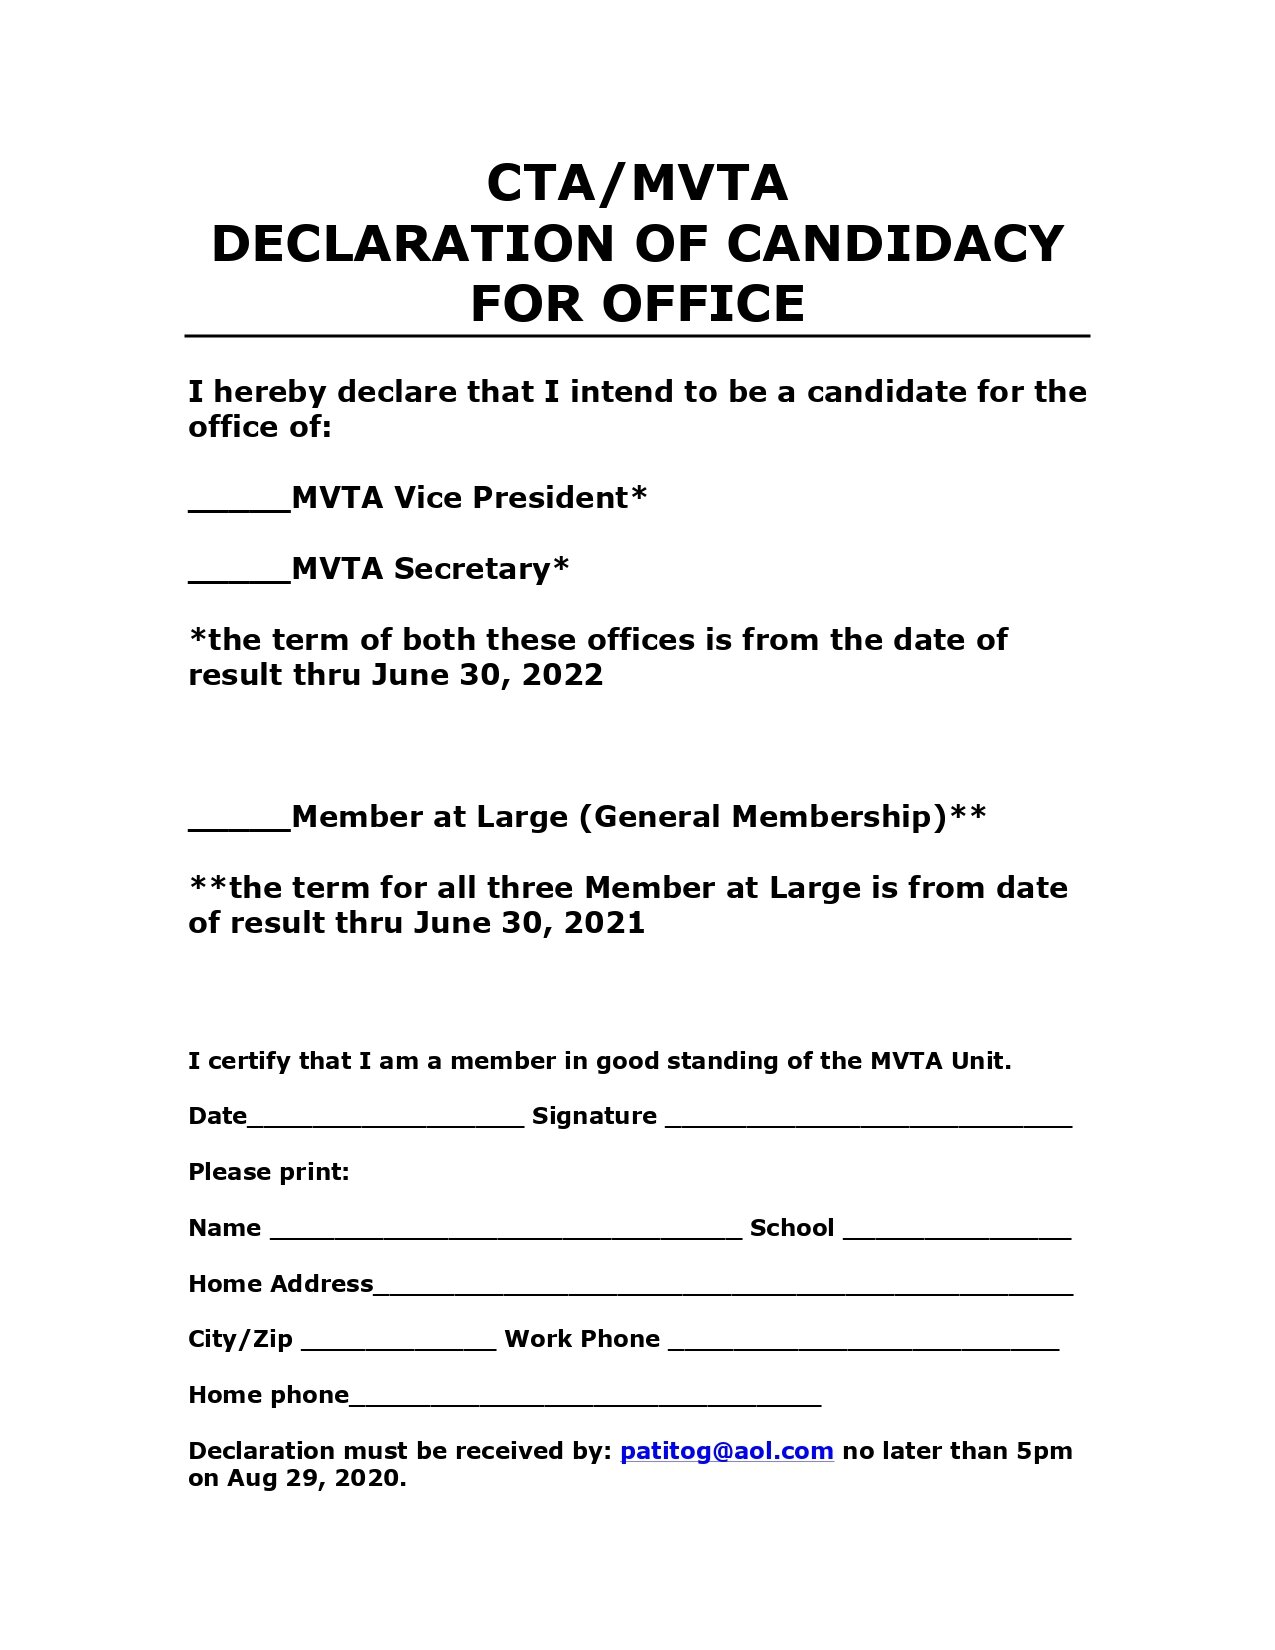 Election Documents Aug 2020_page-0003.jpg